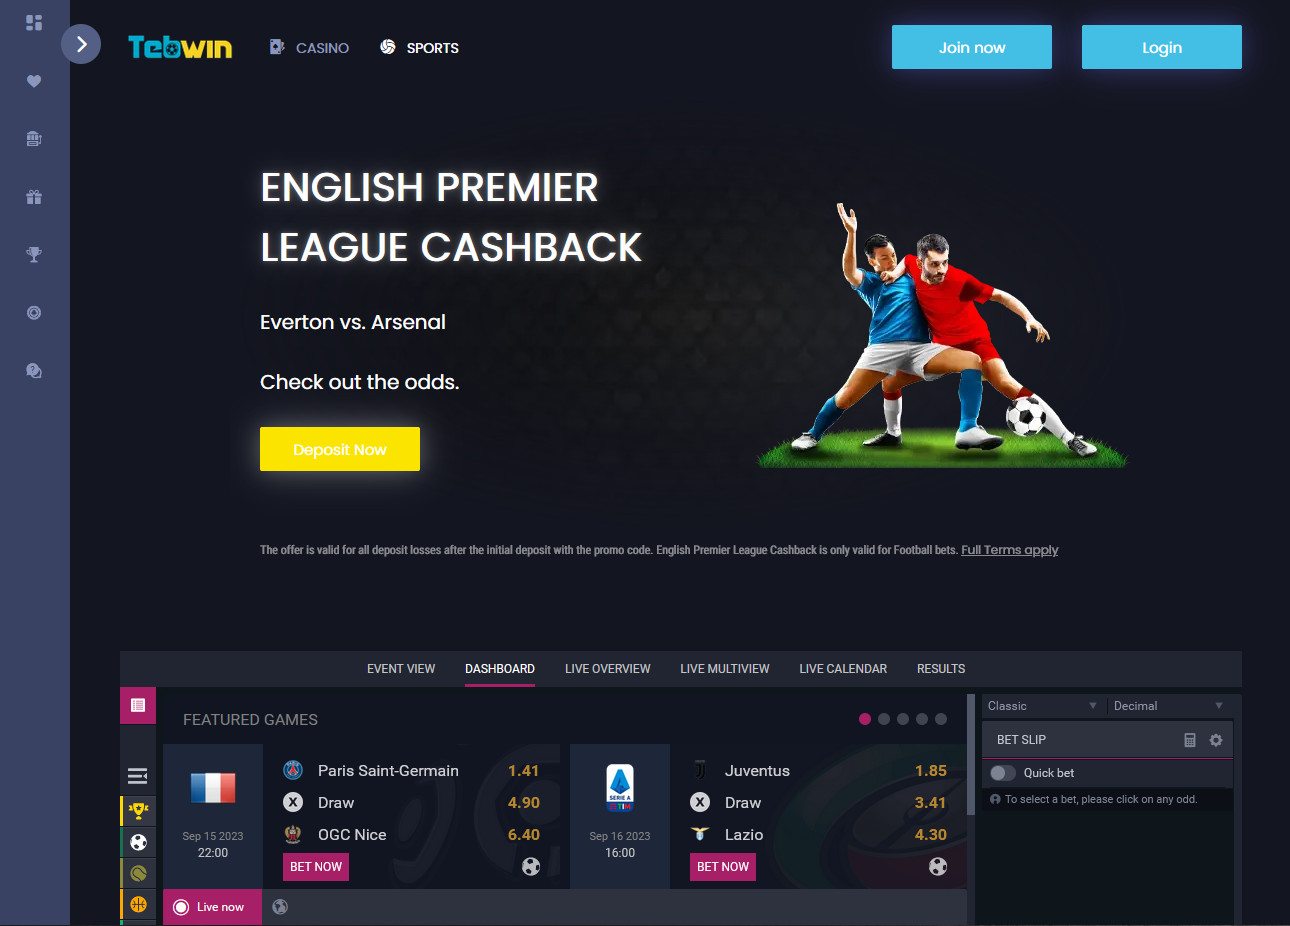 Tebwin bookmaker home page.